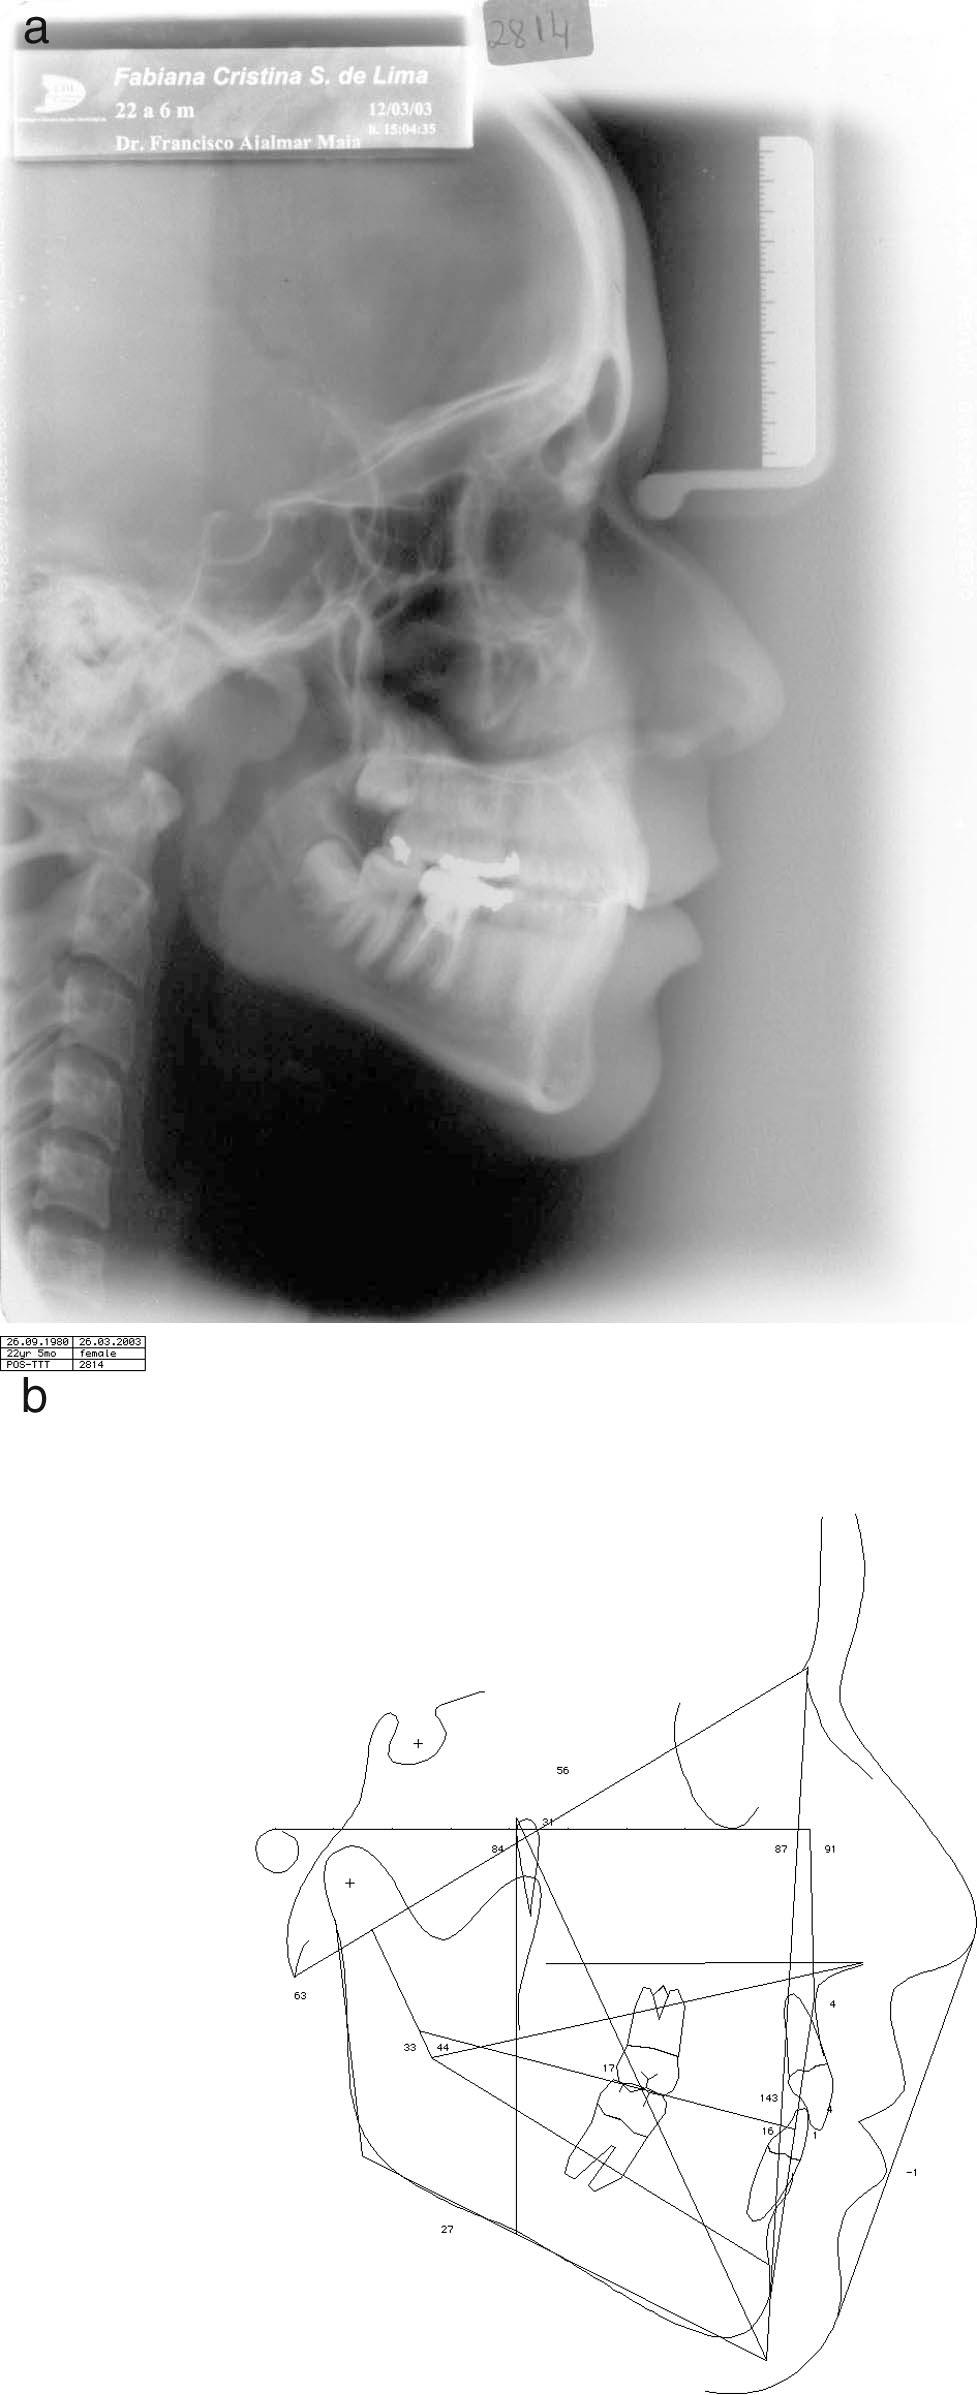 274 AJALMAR MAIA, GALVÃO MAIA FIGURE 12. Cephalometric radiography (a) tracing and measurements (b) seven years and seven months after treatment. dontic space closure.